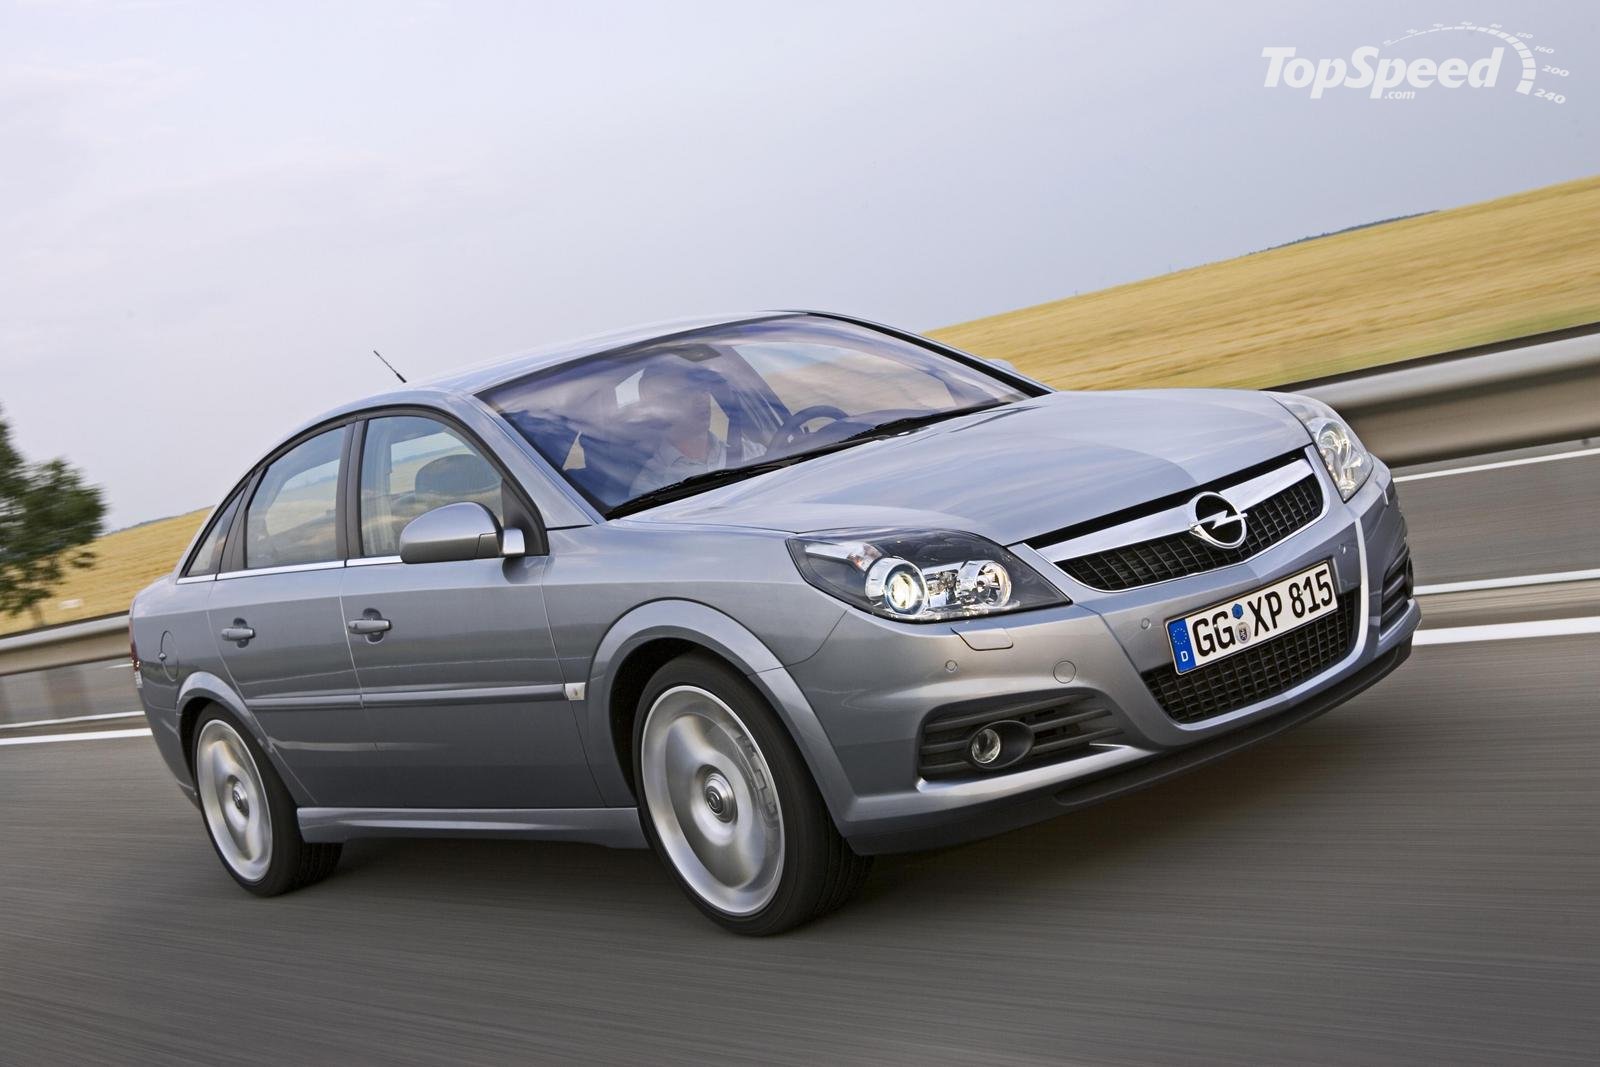 Opel Vectra 1600. View Download Wallpaper. 1600x1067. Comments